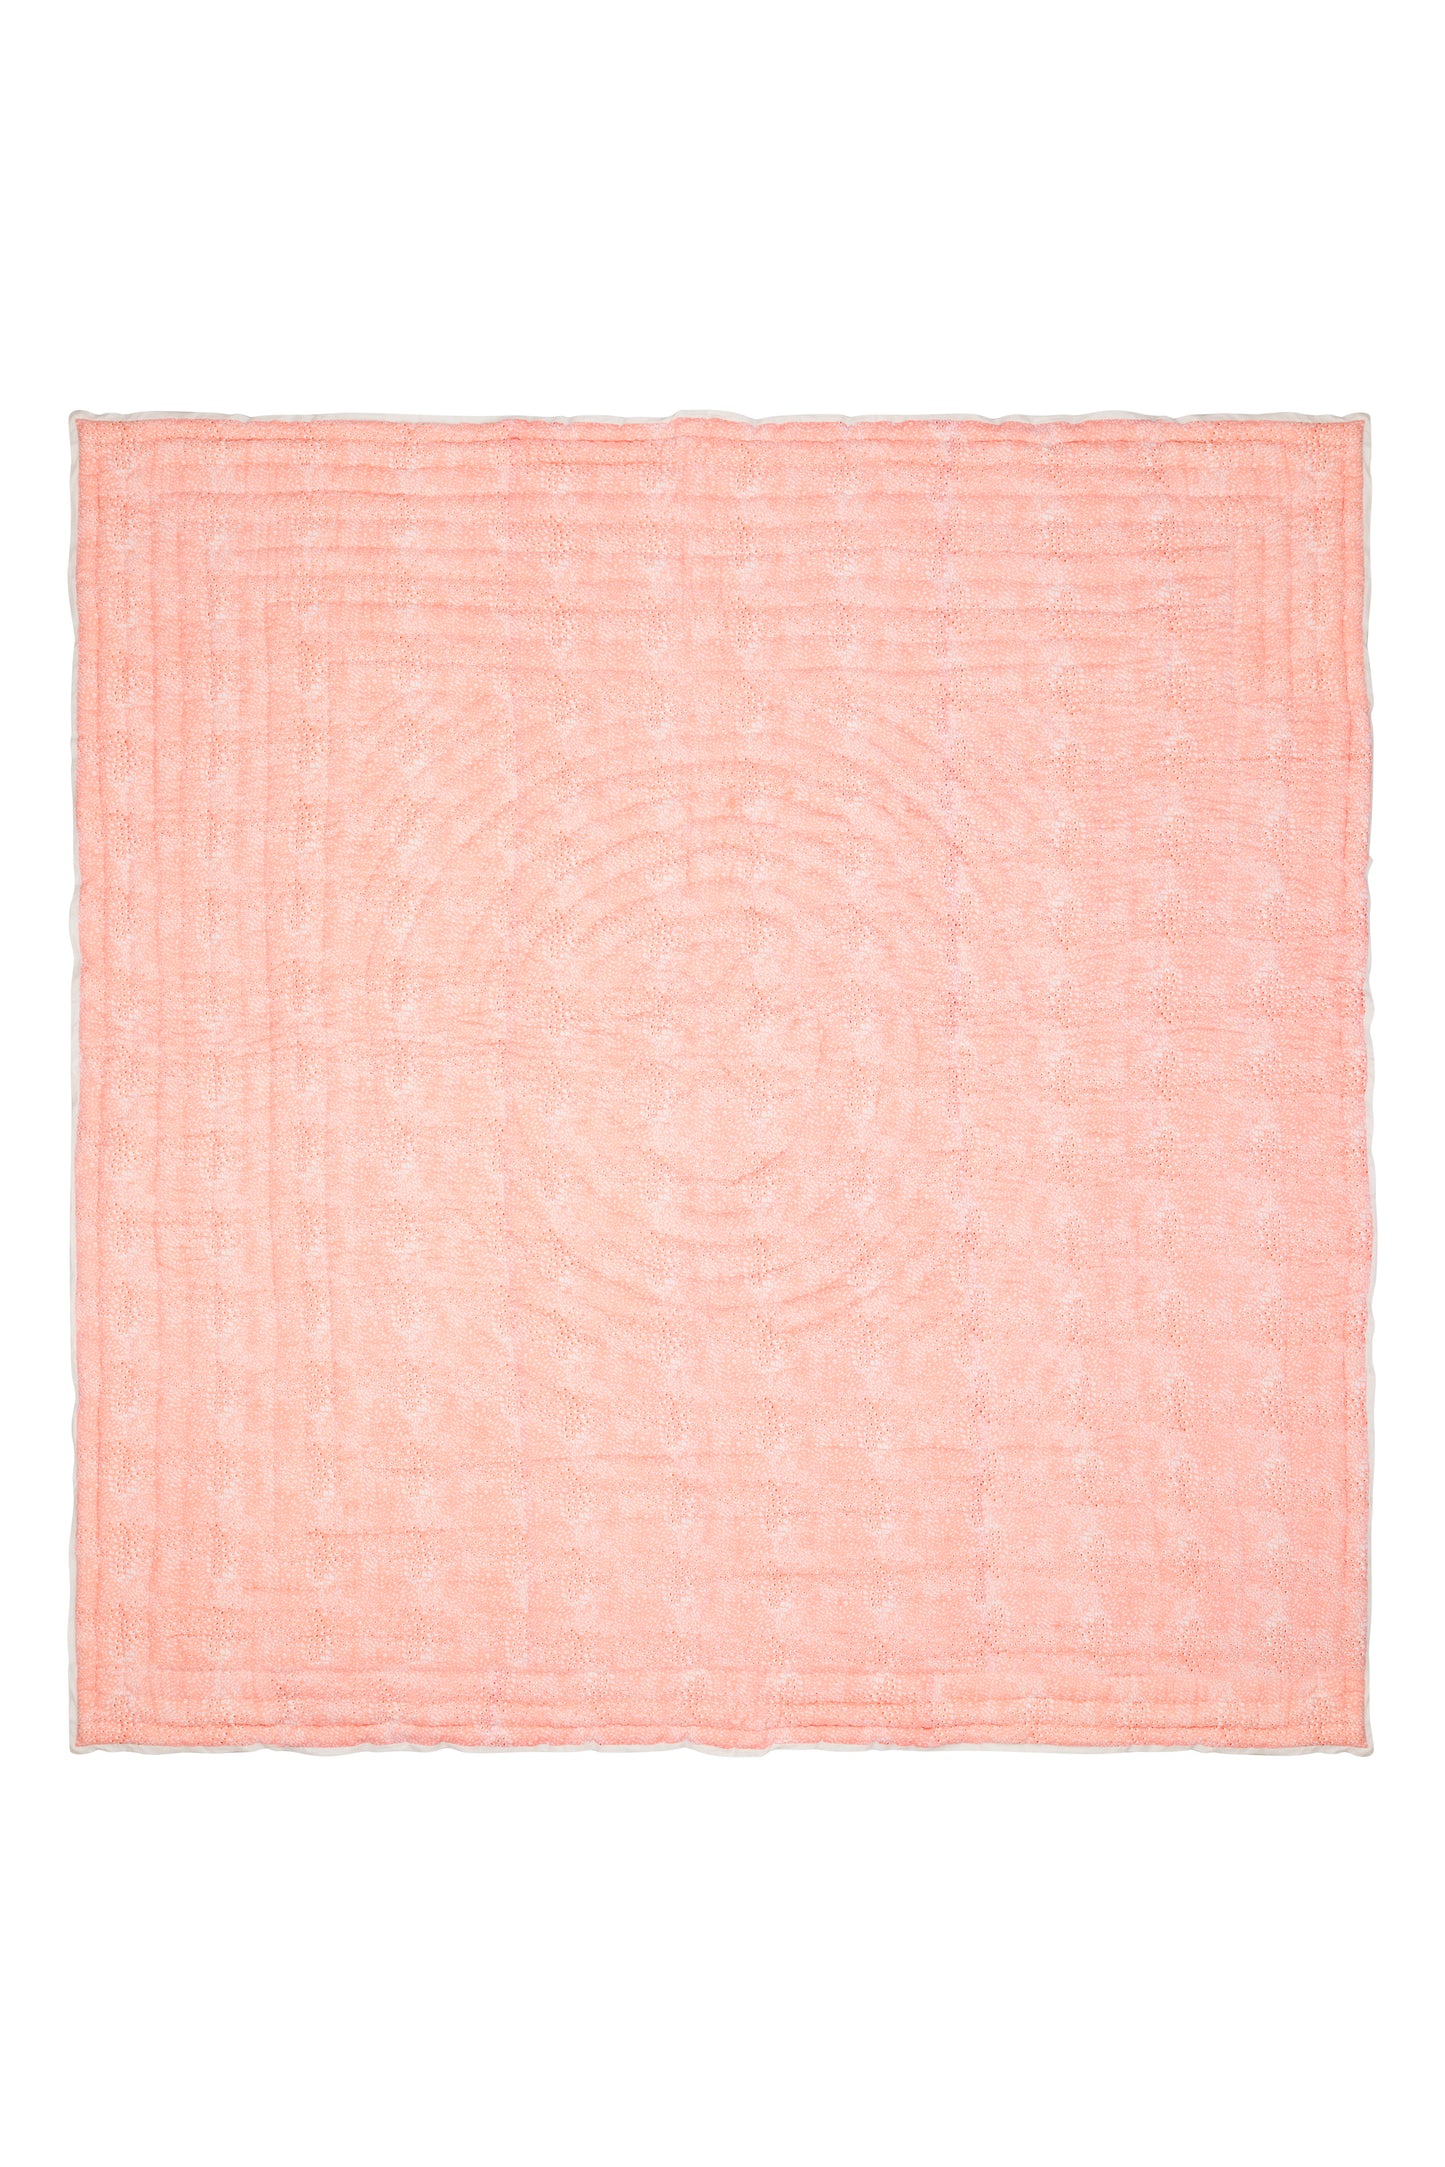 Pink Coral and Stripe Print Quilt